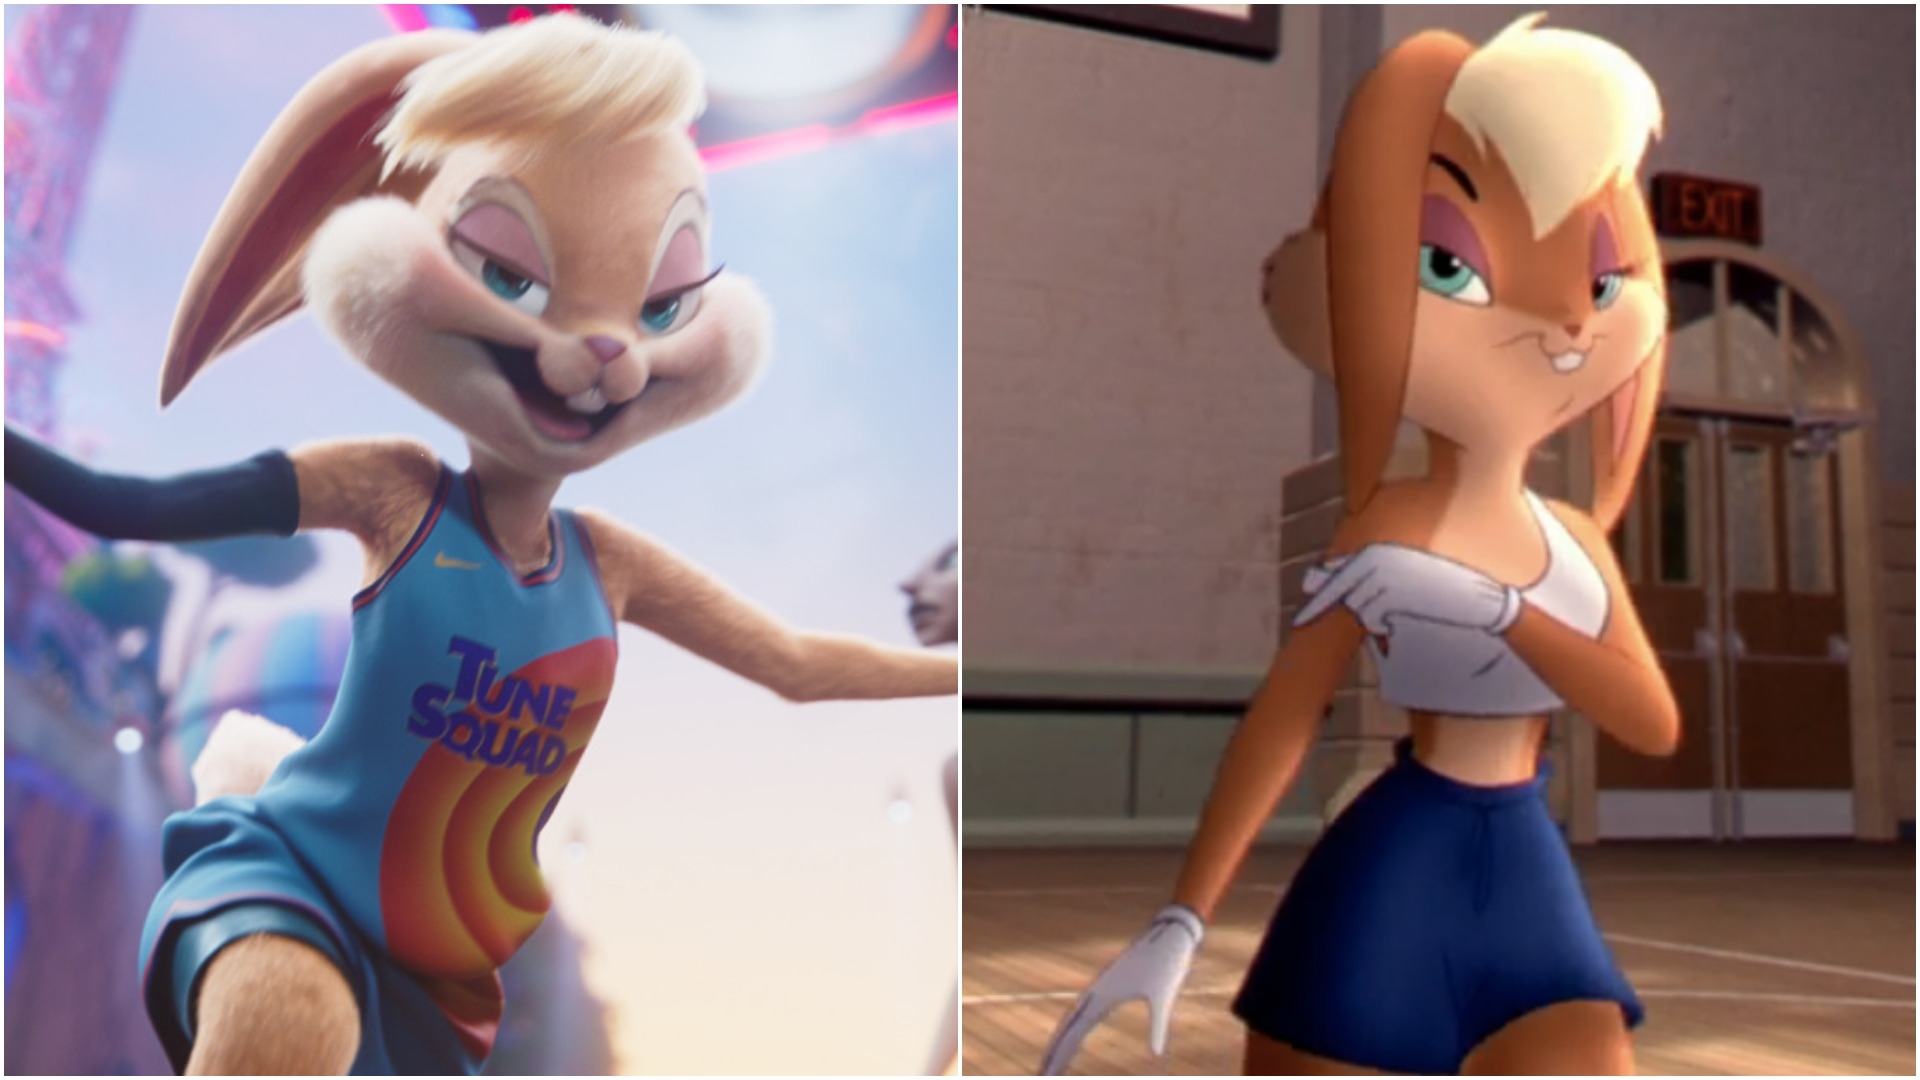 Space Jam: A New Legacy's director thinks y'all are "super weird" for mourning the loss of an over-sexualized Lola Bunny